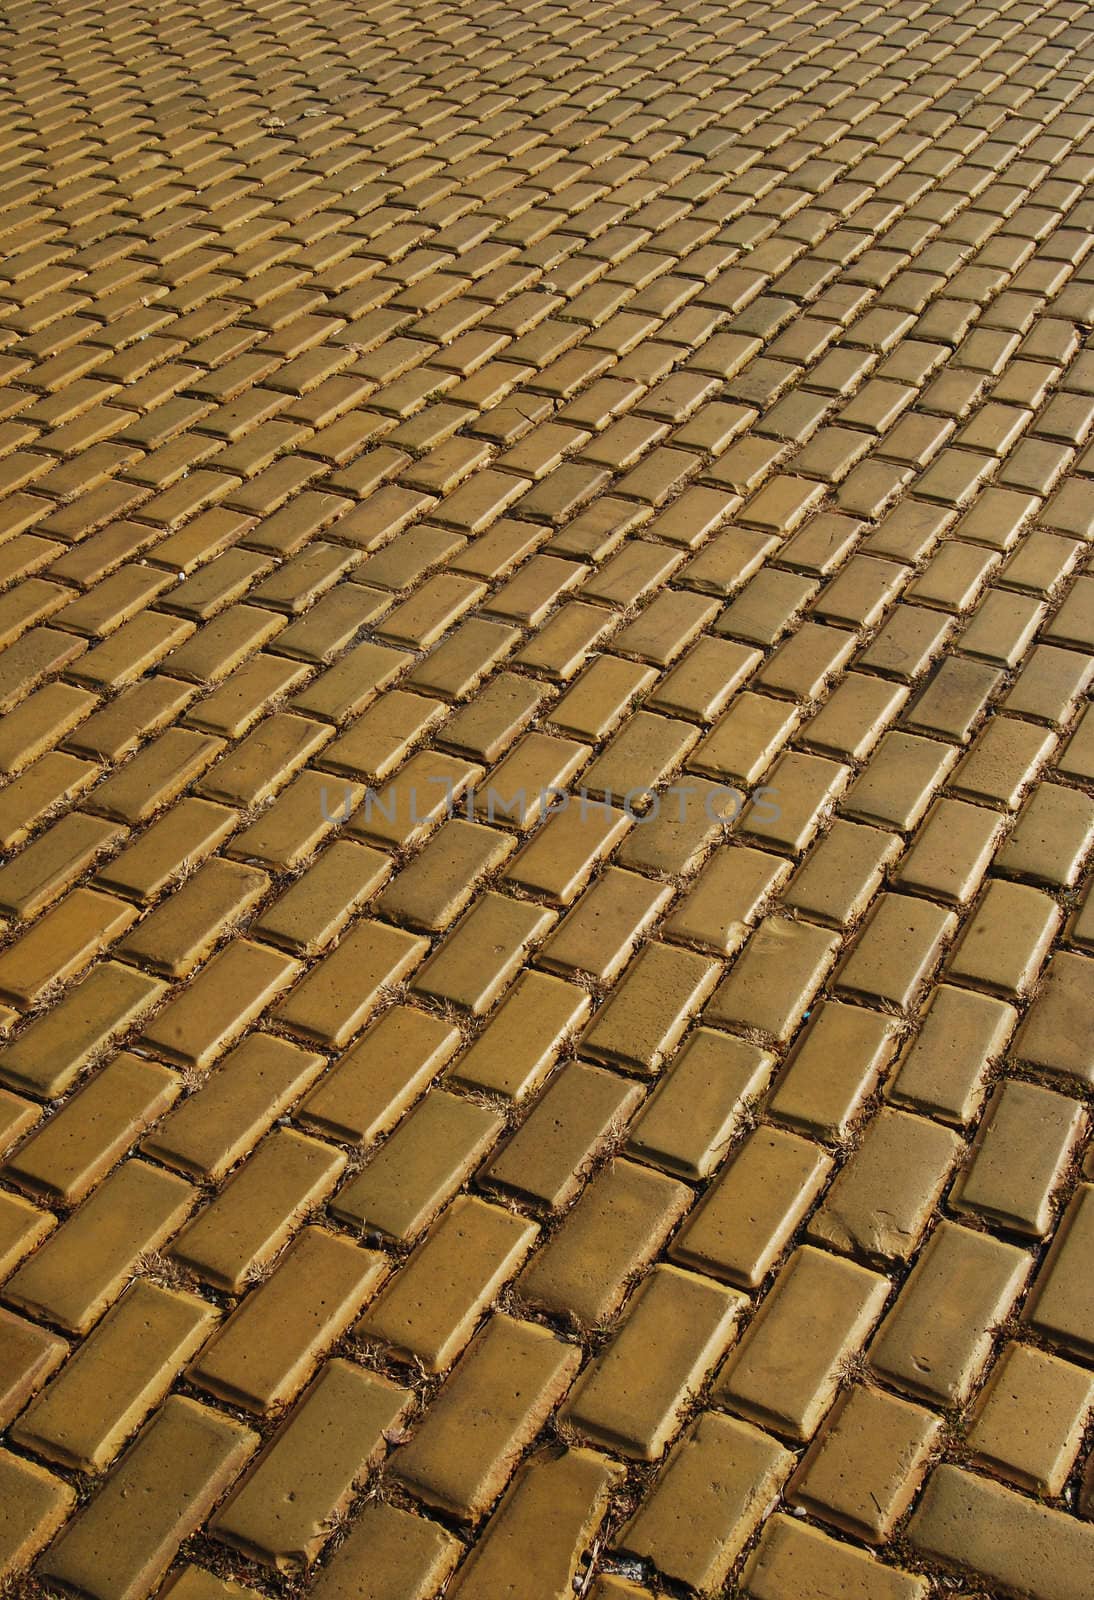 Yellow ceramic town pavement close-up and perspective